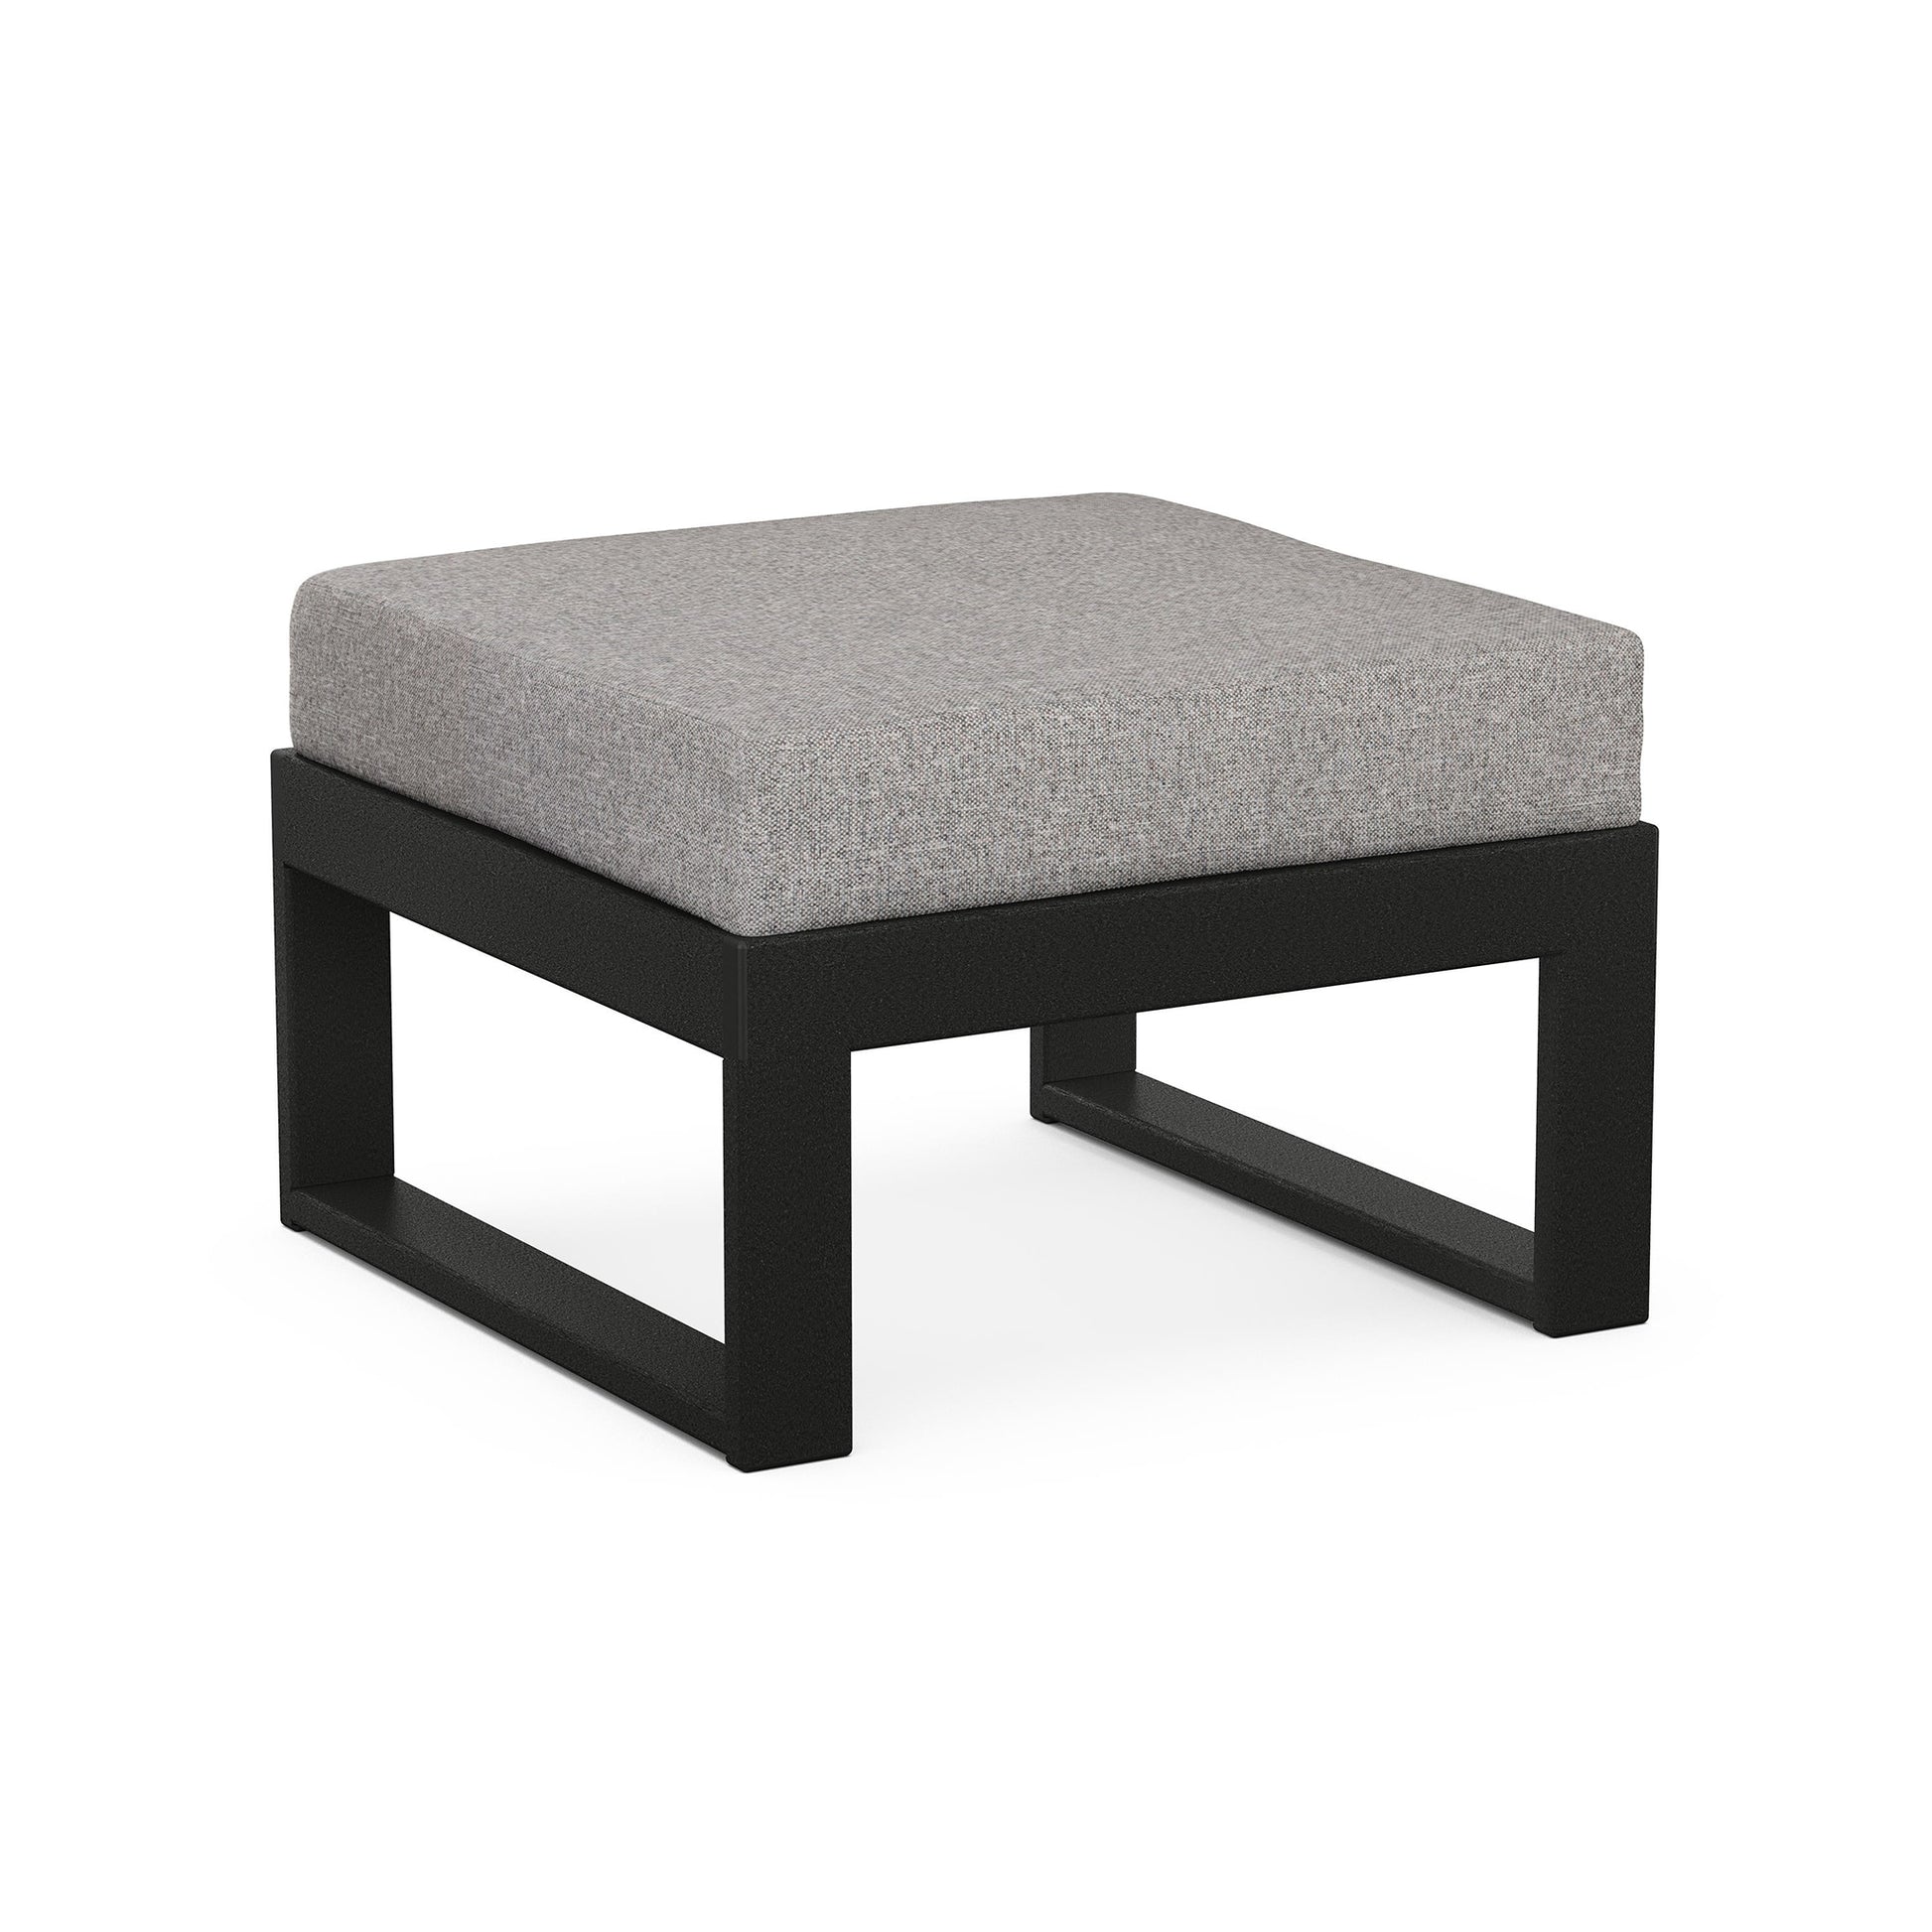 A modern ottoman from the POLYWOOD Modular Ottoman with a light gray cushion on a sleek black metal frame, isolated on a white background.